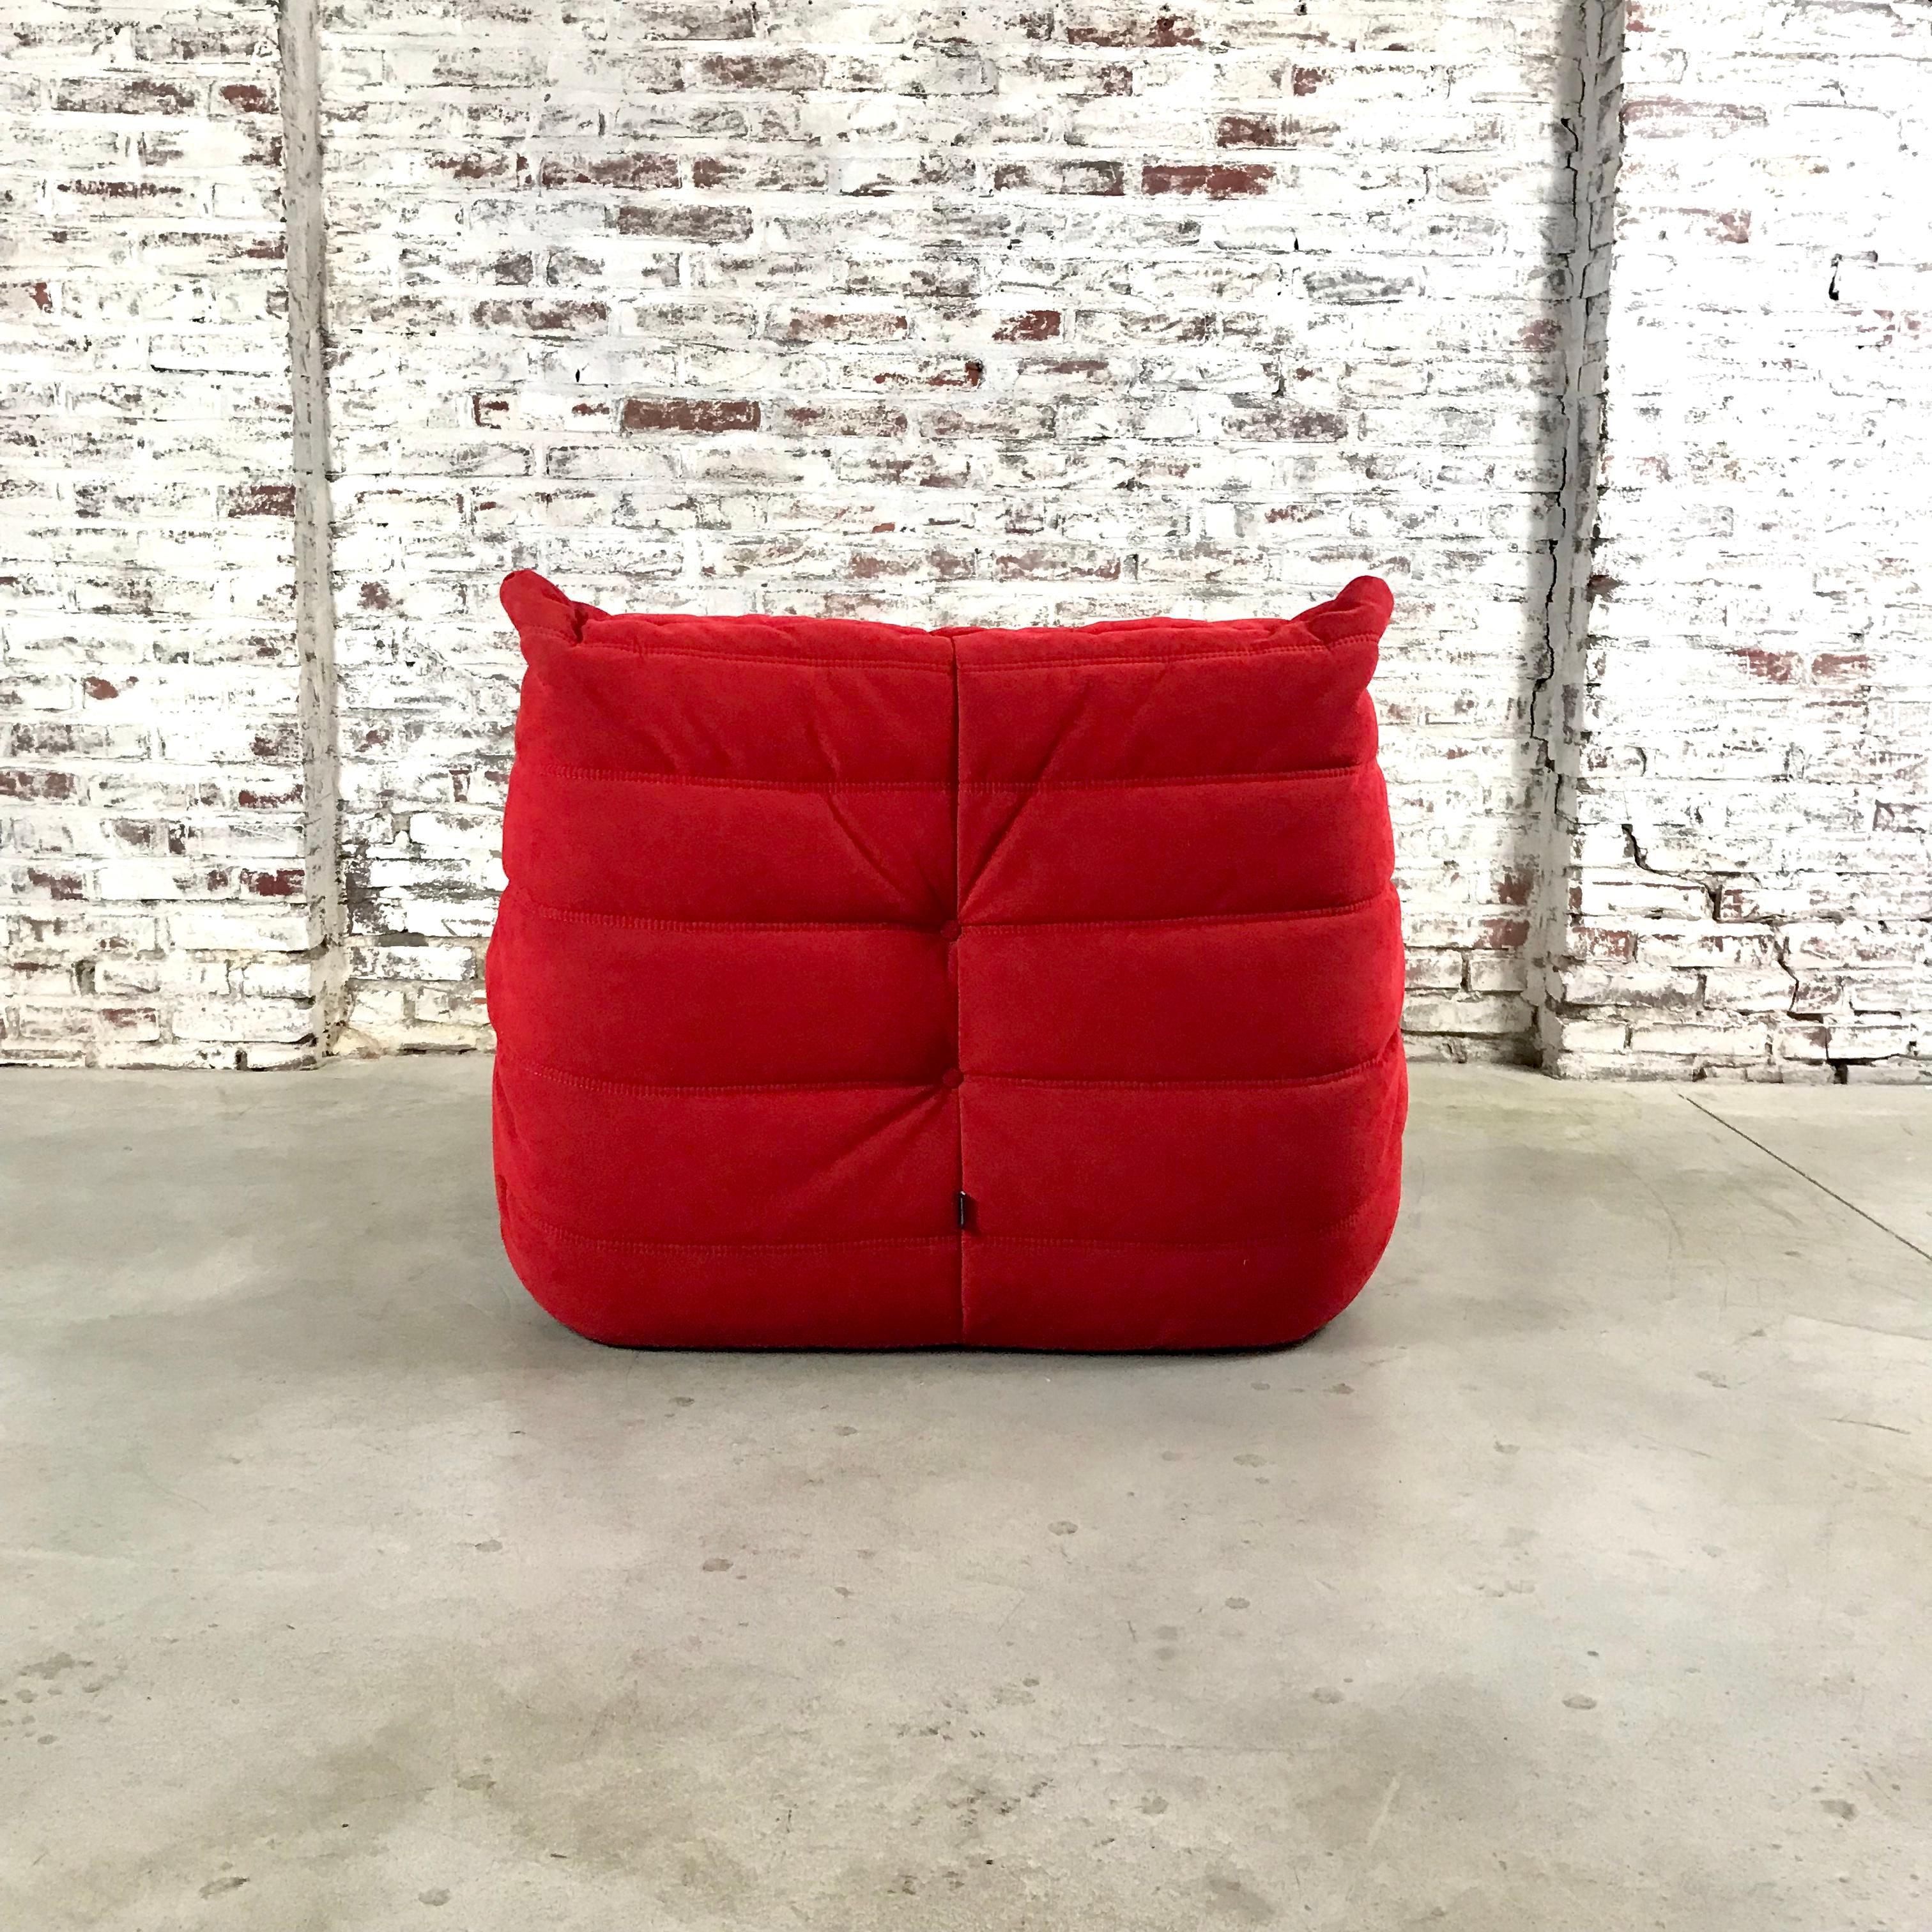 Mid-Century Modern French Togo Lounge Chair in Alcantar Goya Red by Michel Ducaroy for Ligne Roset For Sale